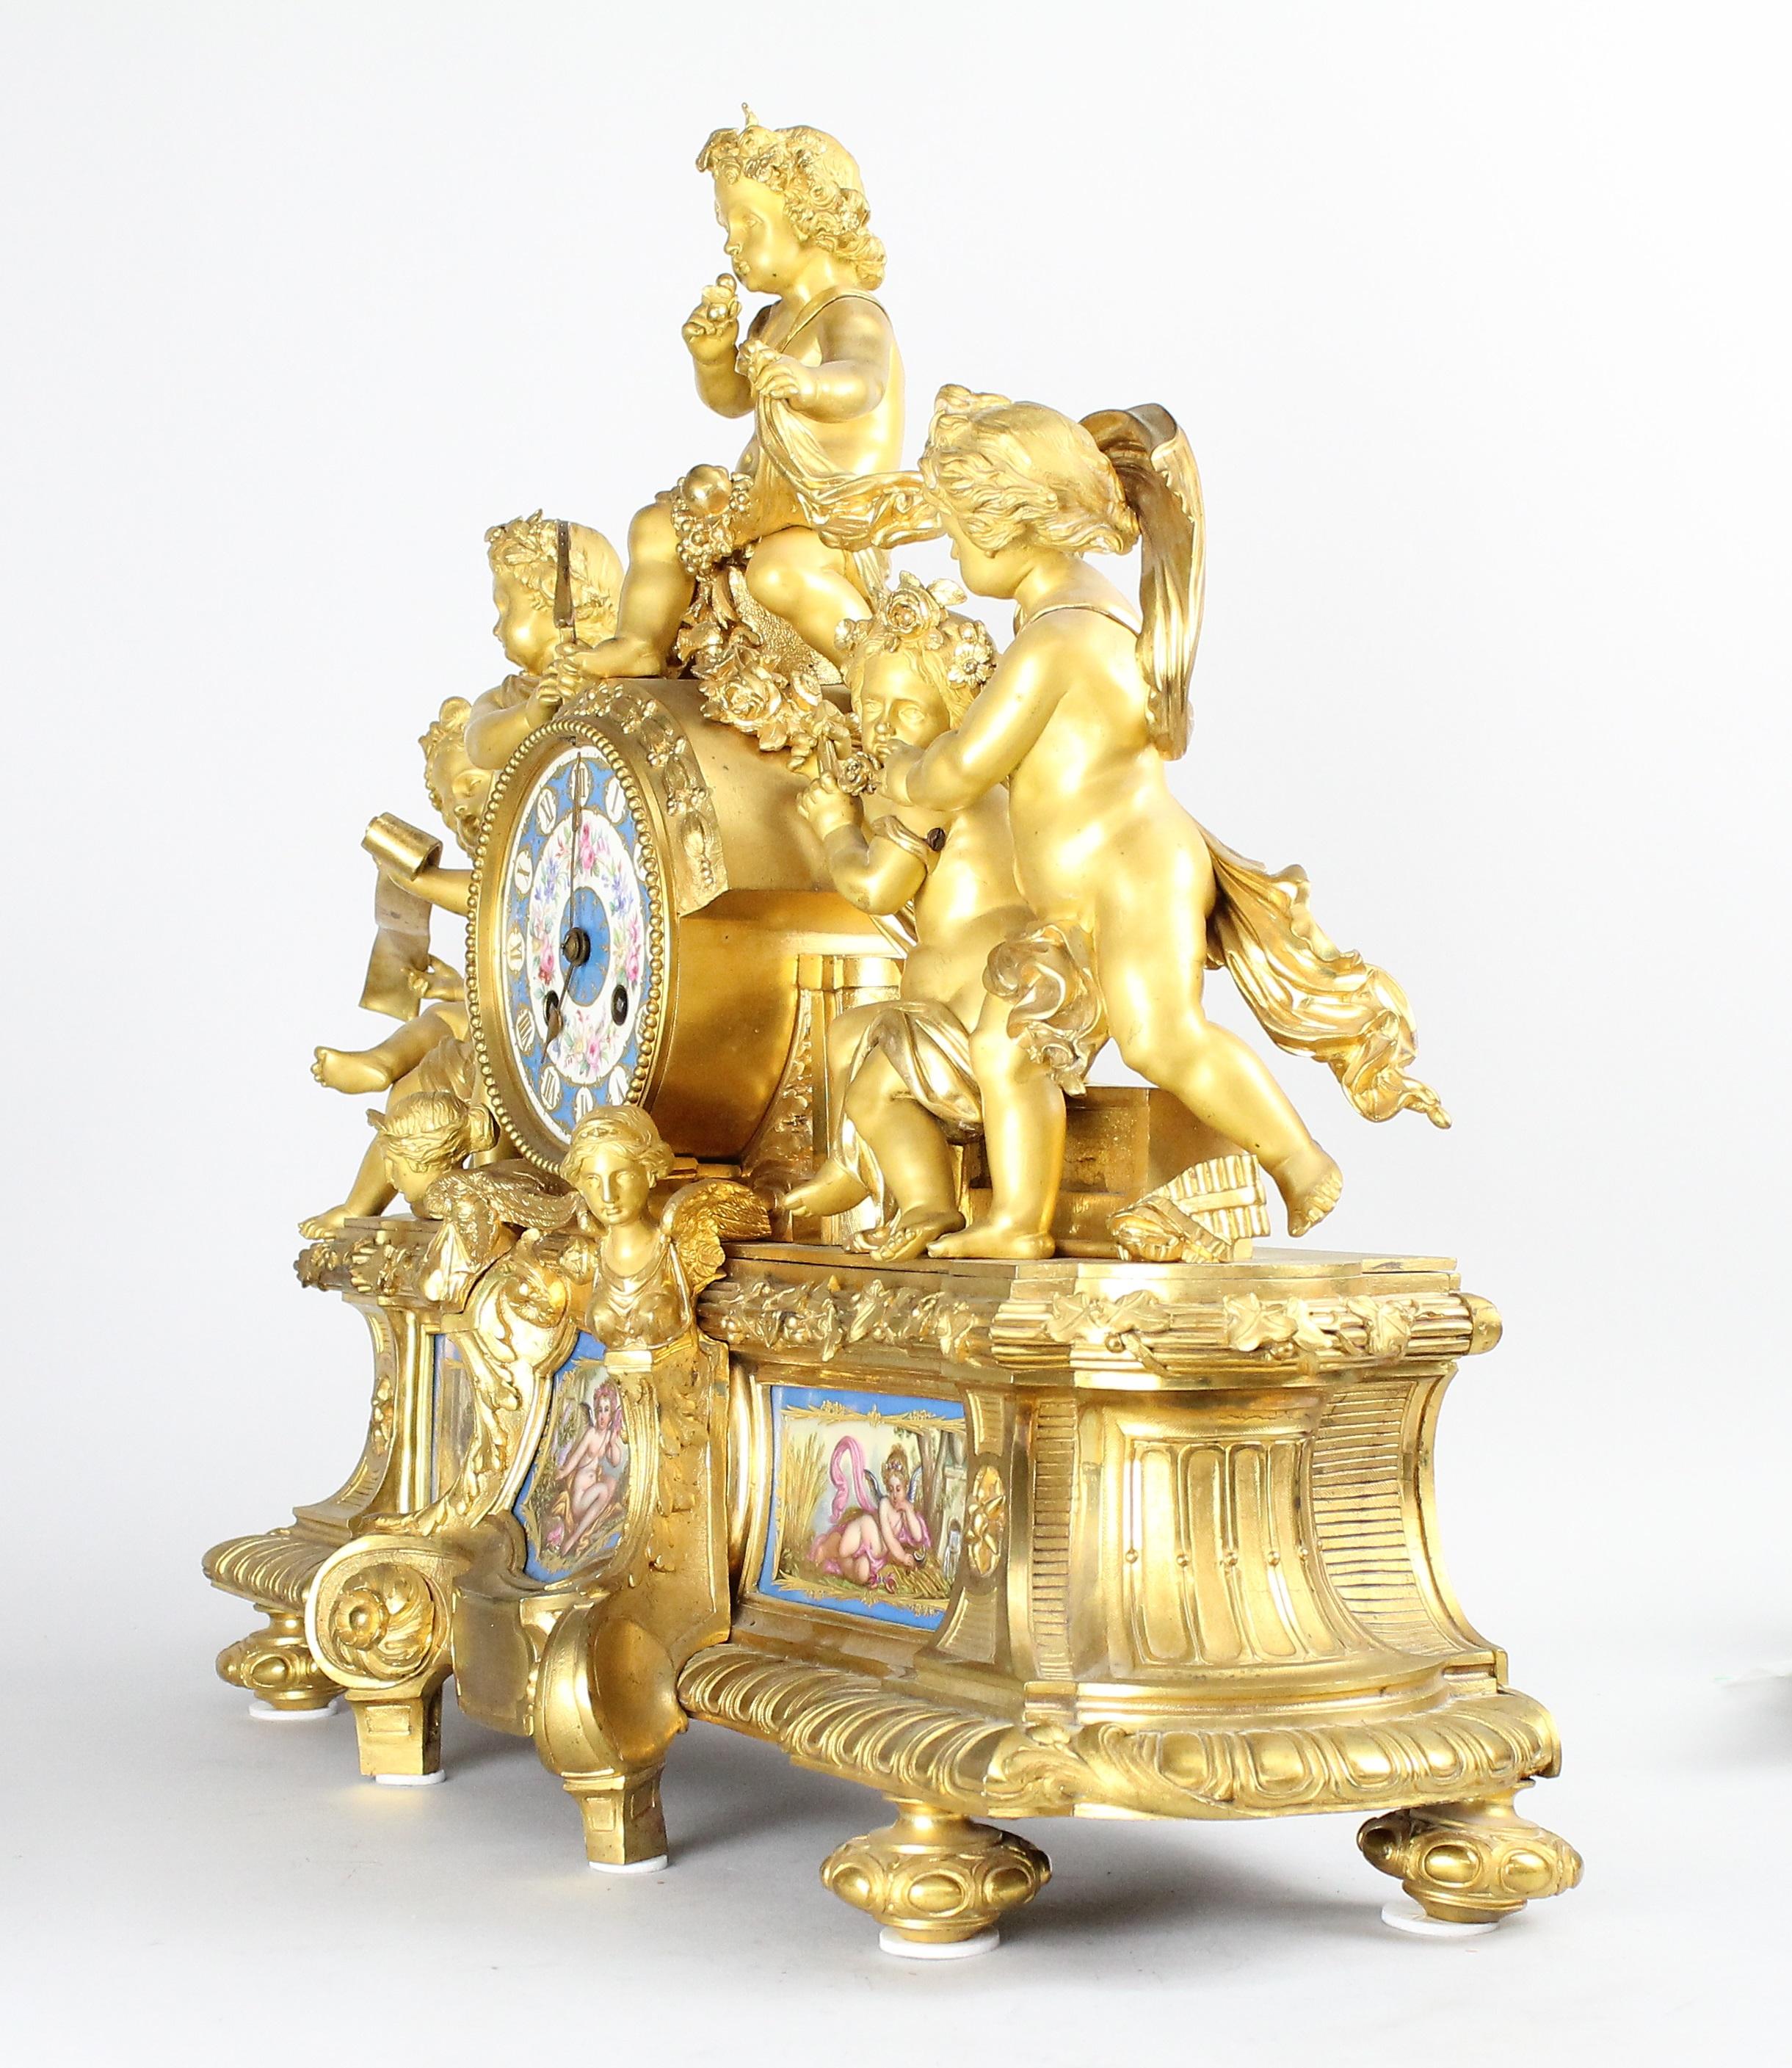 Porcelain French Louis XVI Style Mantel Clock with Sevres Plaques, circa 1870